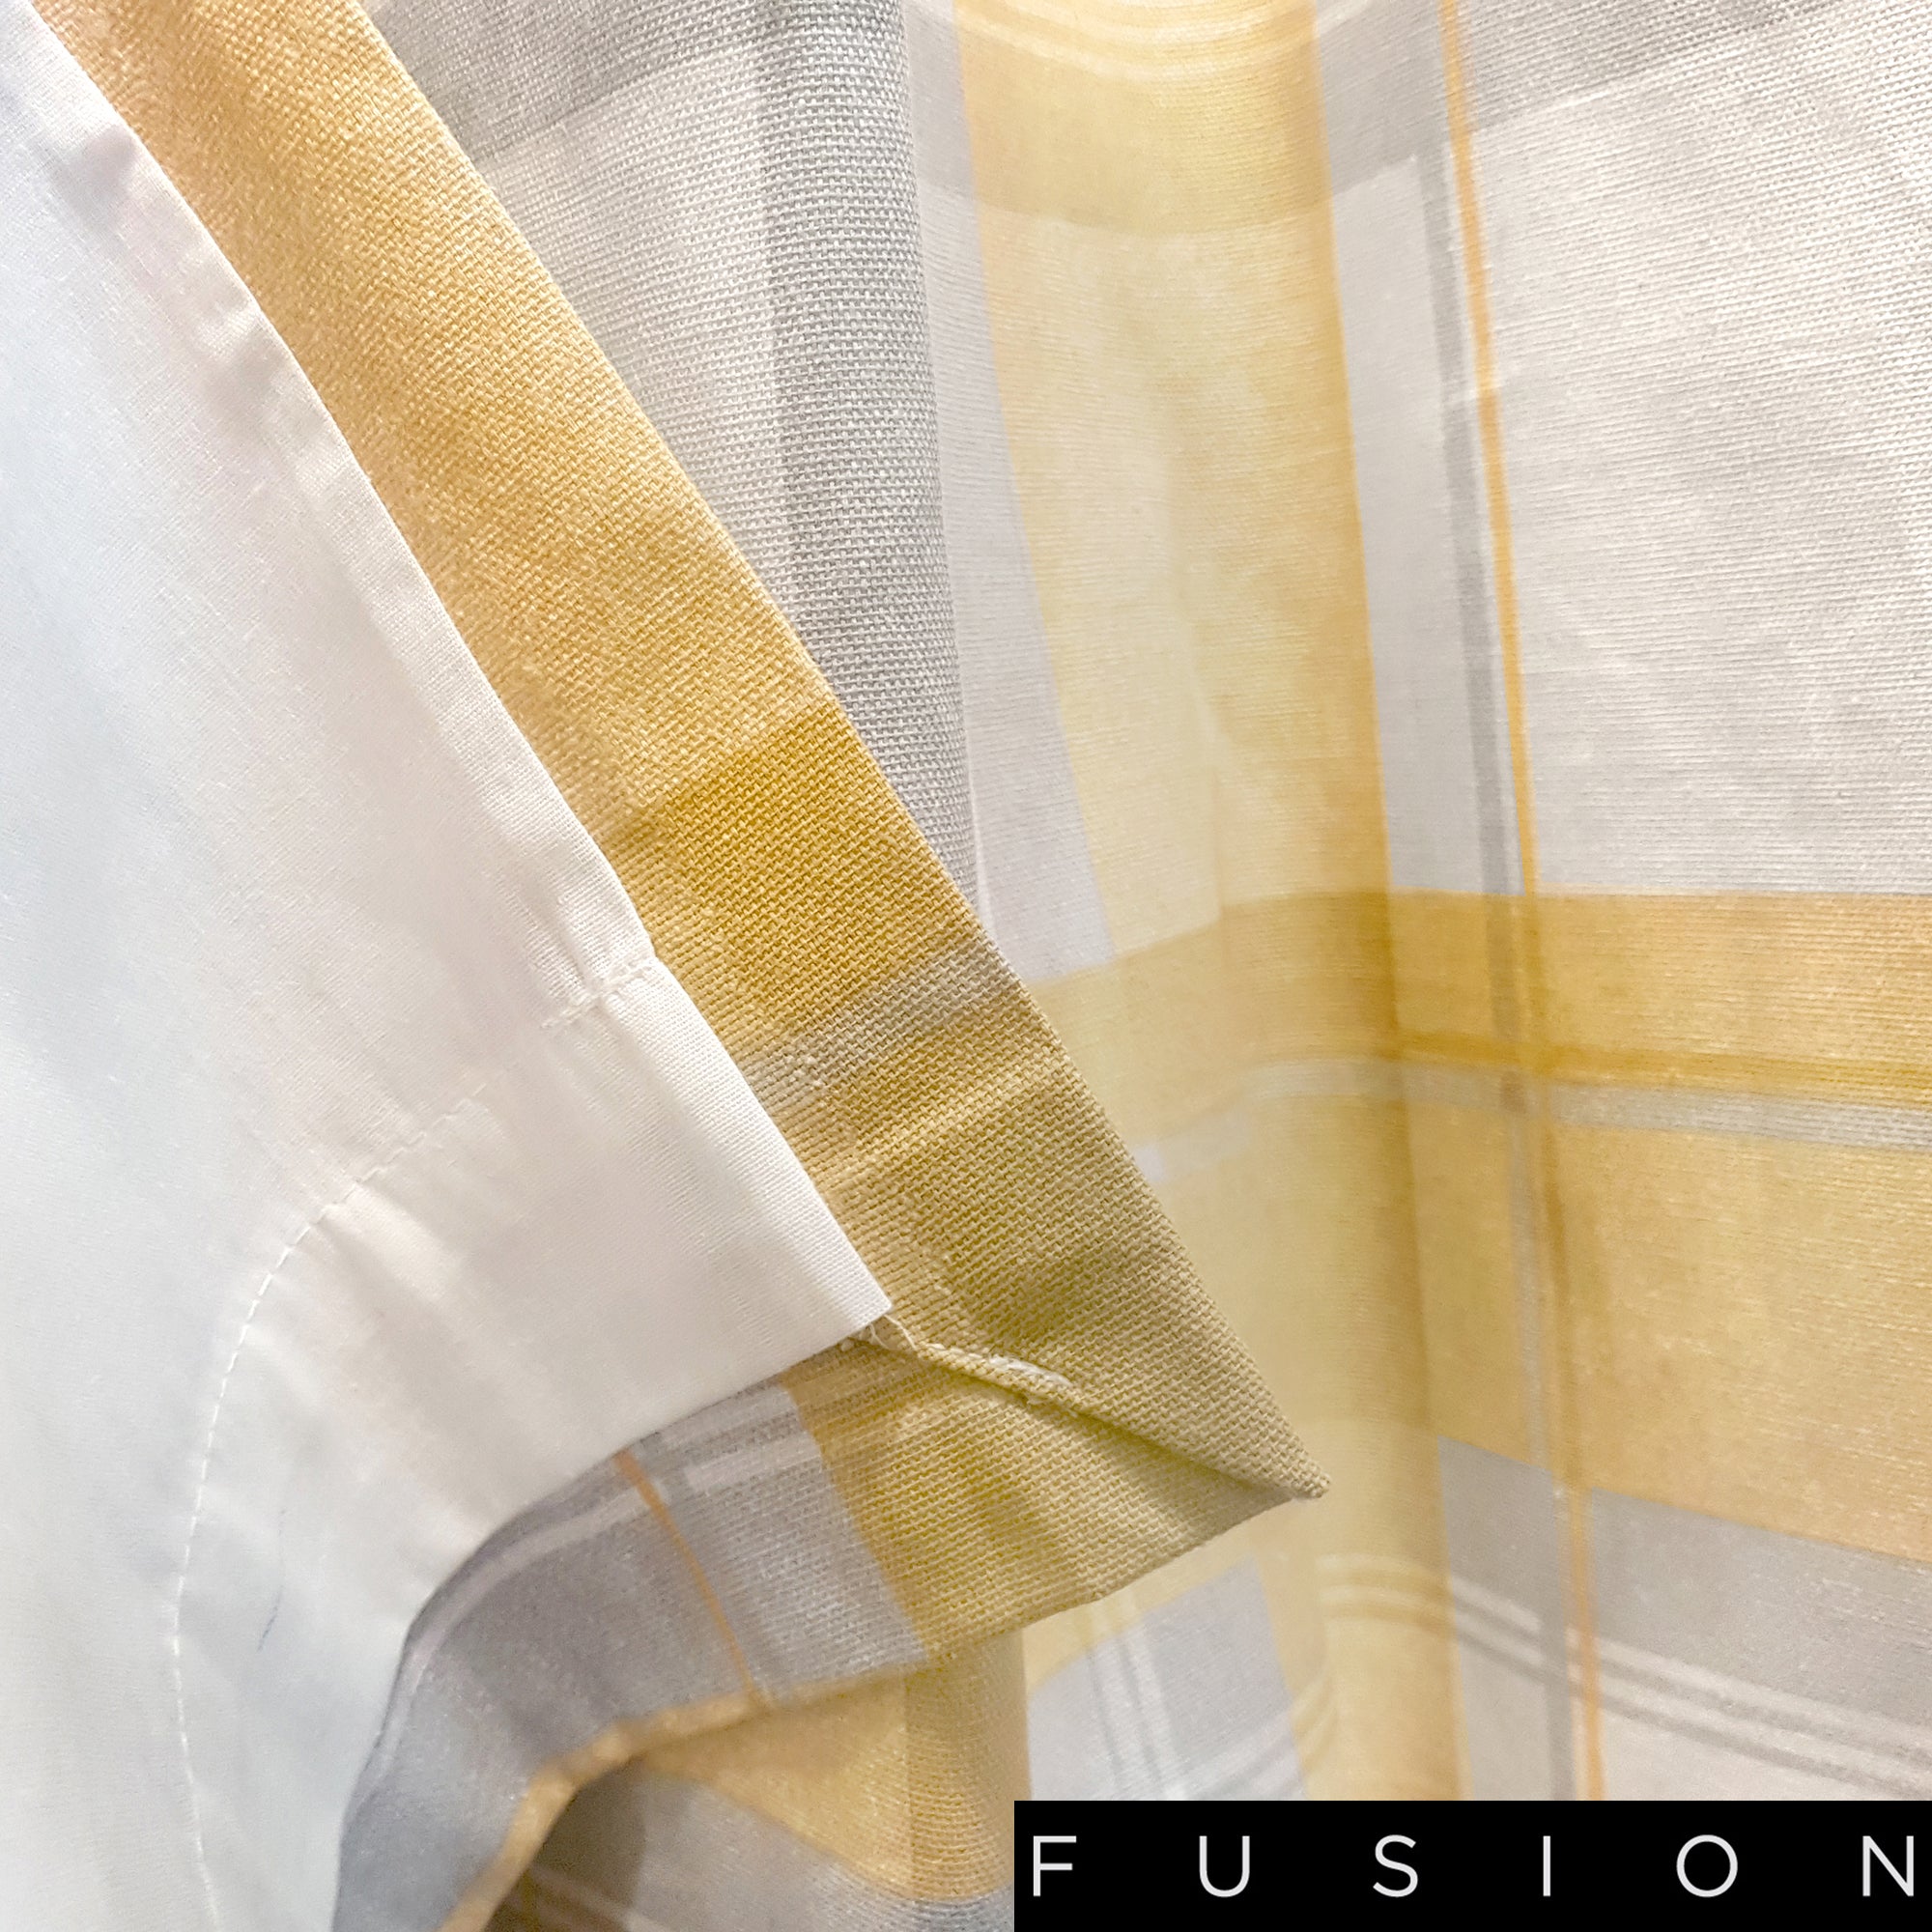 Balmoral Check - 100% Cotton Lined Eyelet Curtains in Ochre - by Fusion